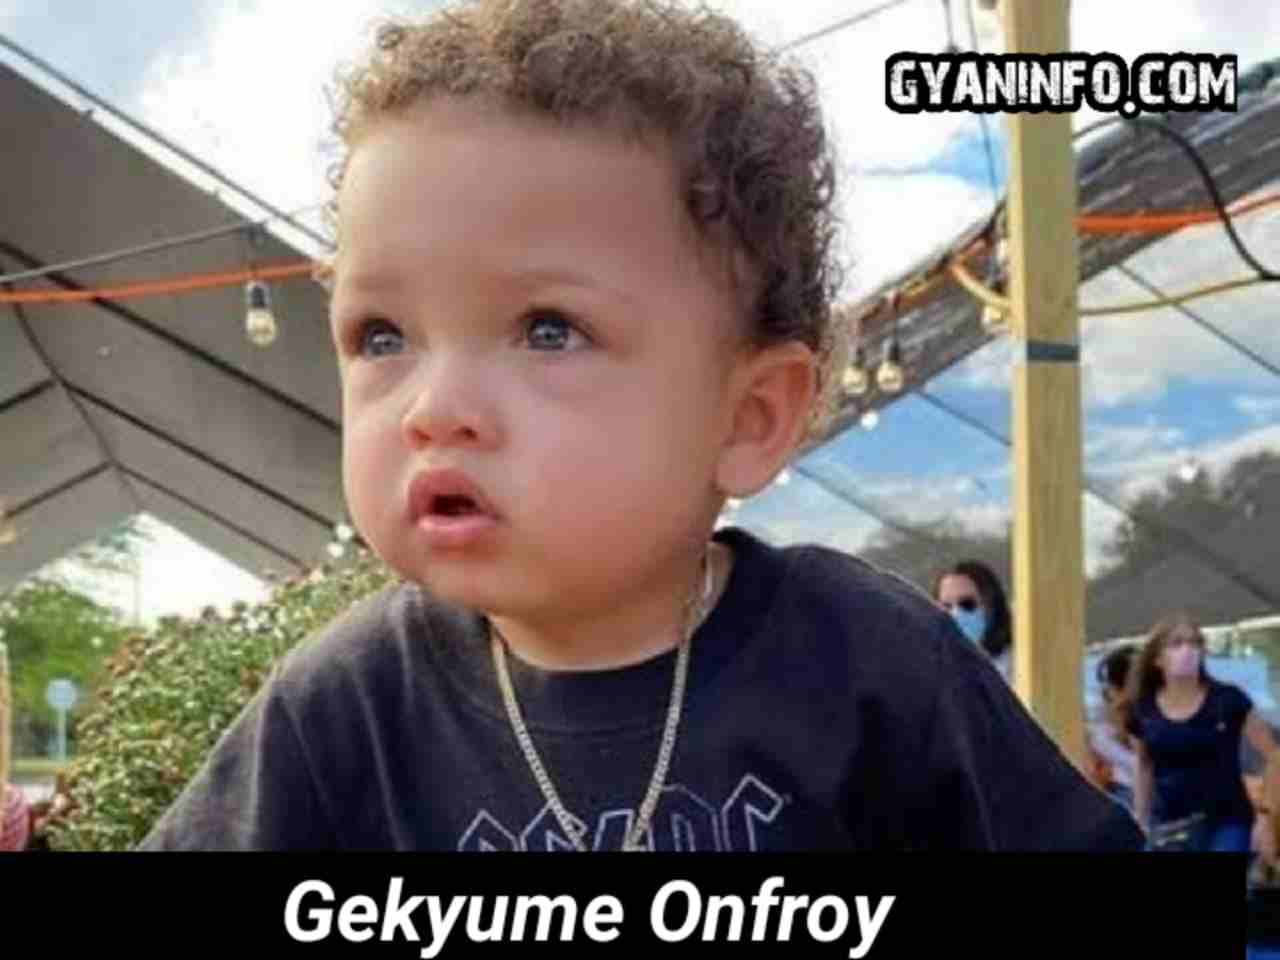 Gekyume Onfroy Biography, Age, Height, Birthday, Girlfriend, Family, Net Worth, Wiki & More